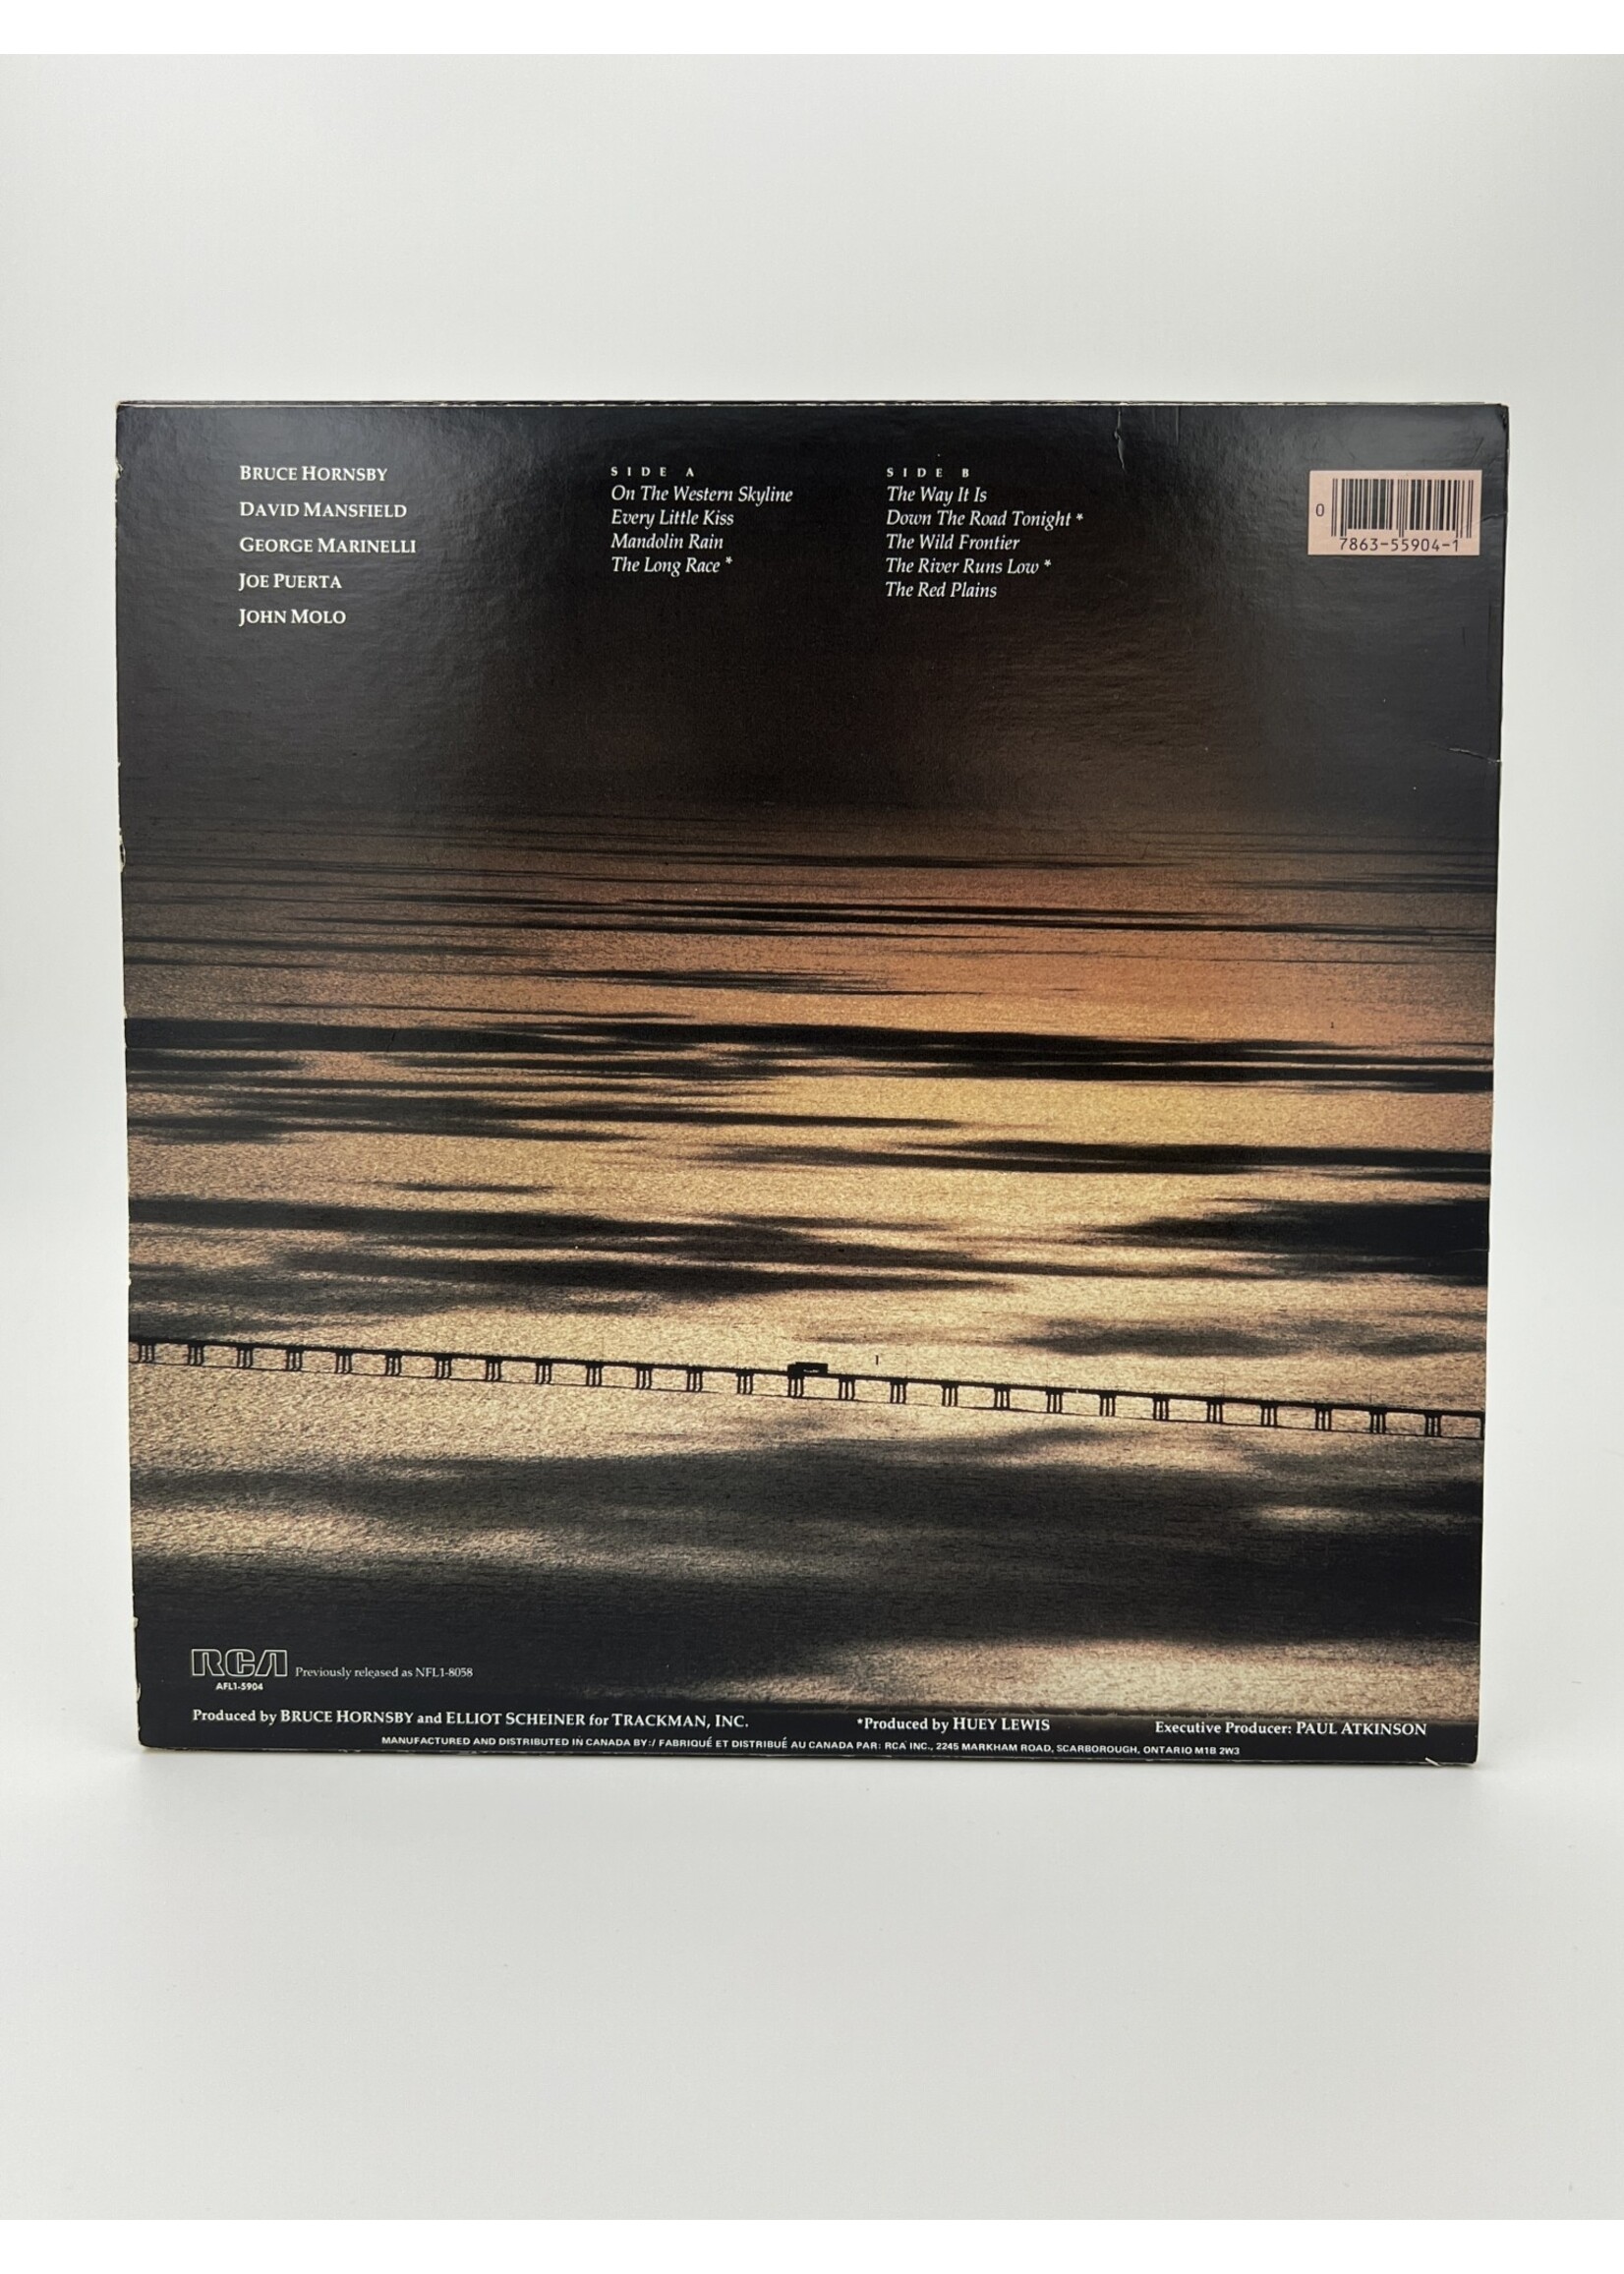 LP   Bruce Hornsby And The Range The Way It Is LP Record